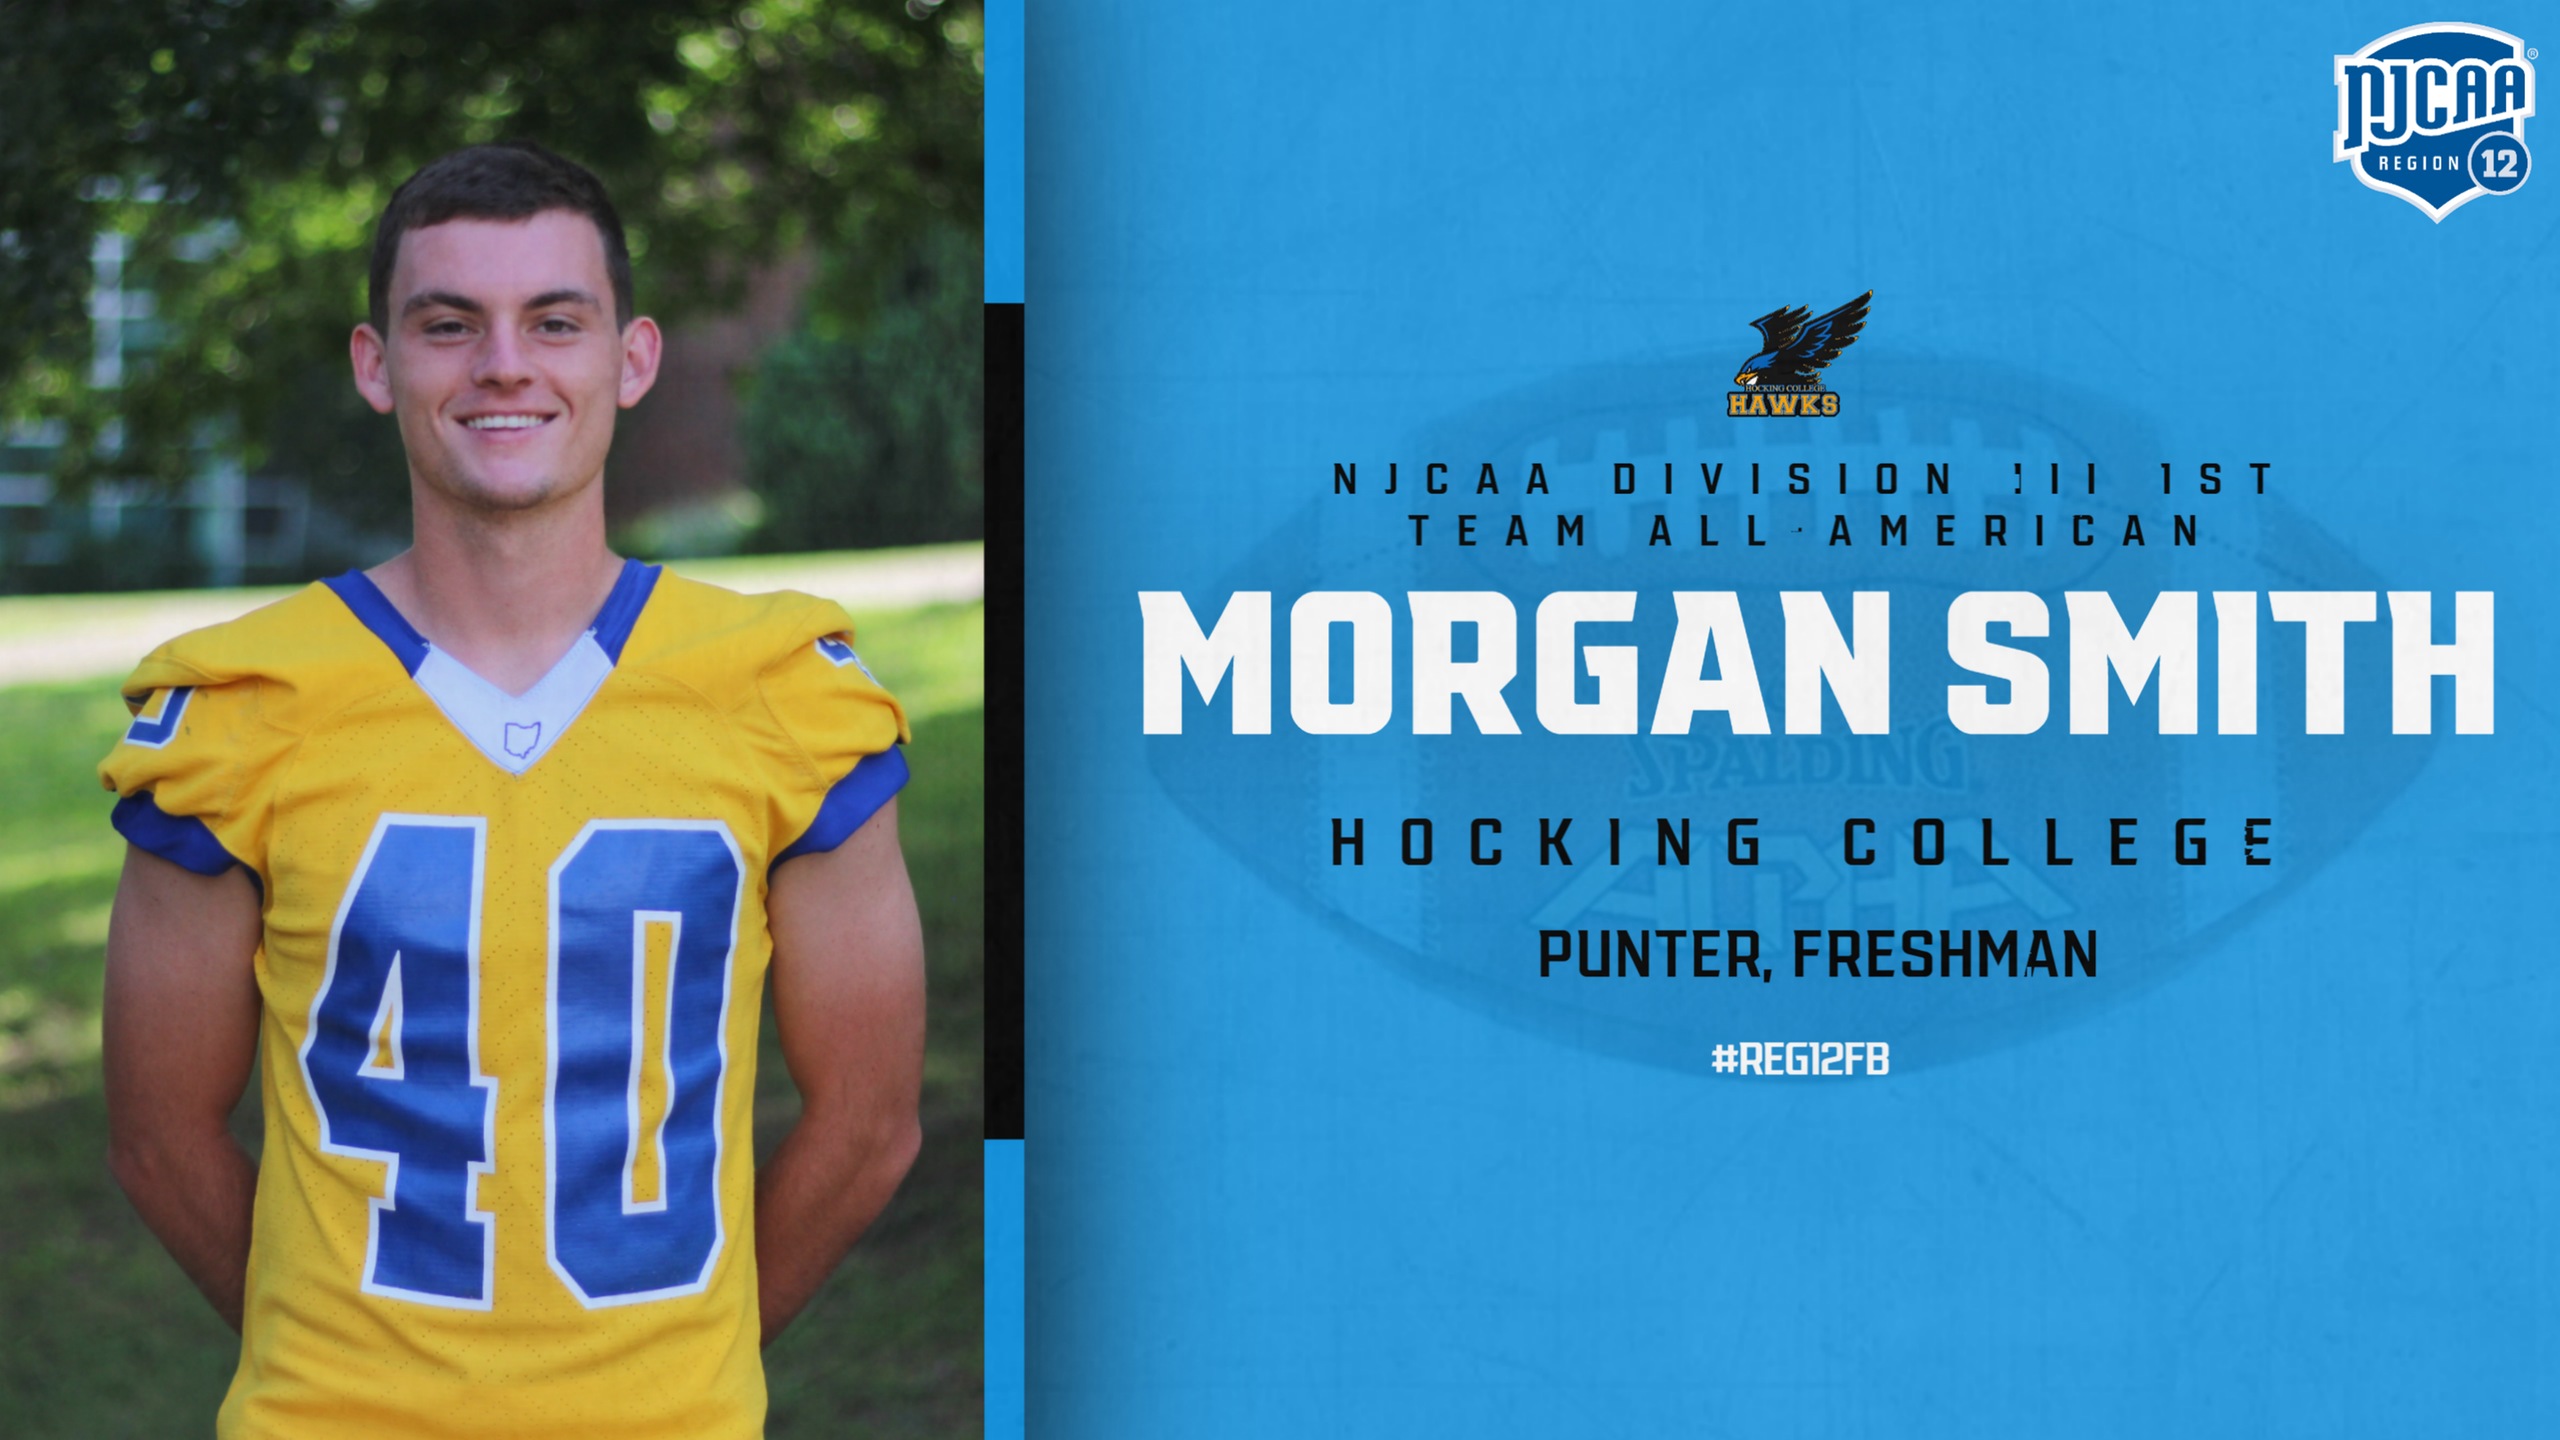 Morgan Smith, NJCAA Division III 1st Team Football All-American, Hocking College, Punter.